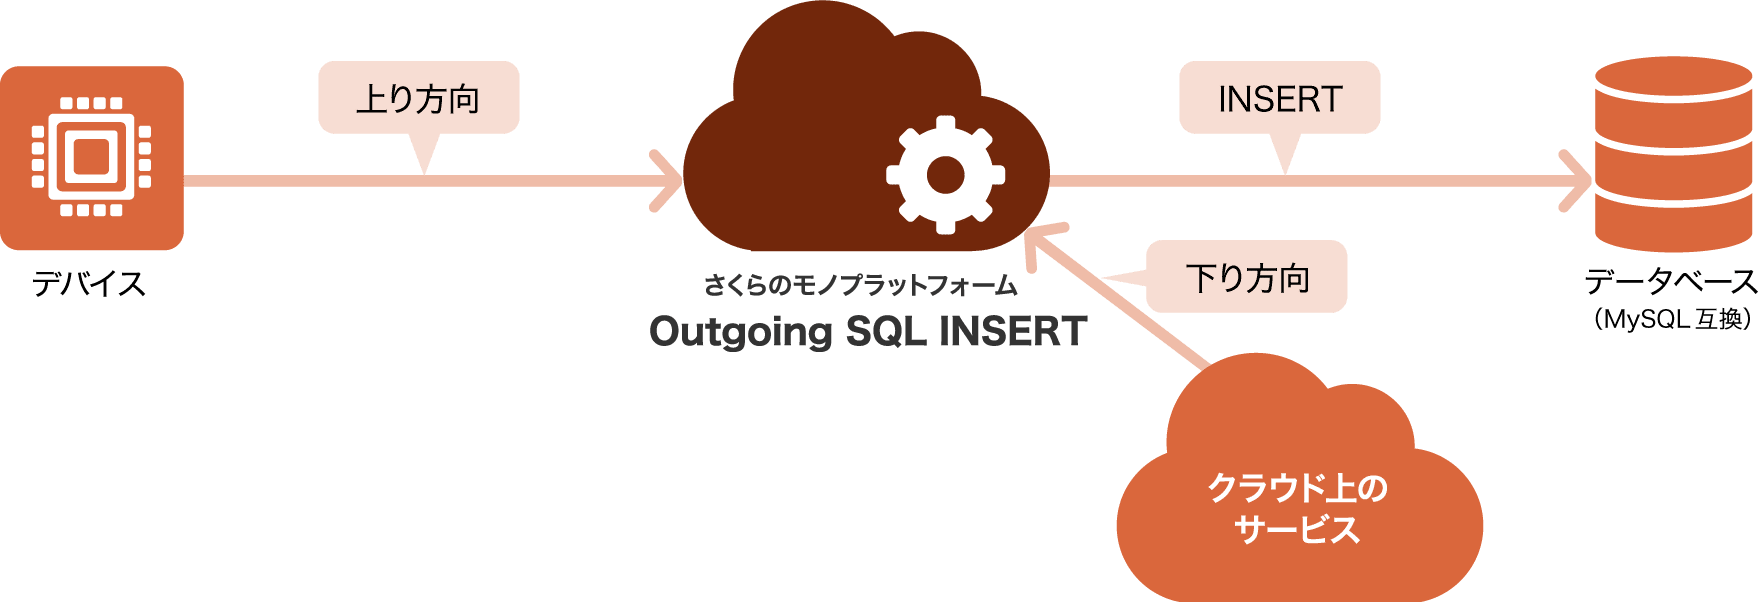 Outgoing SQL INSERT